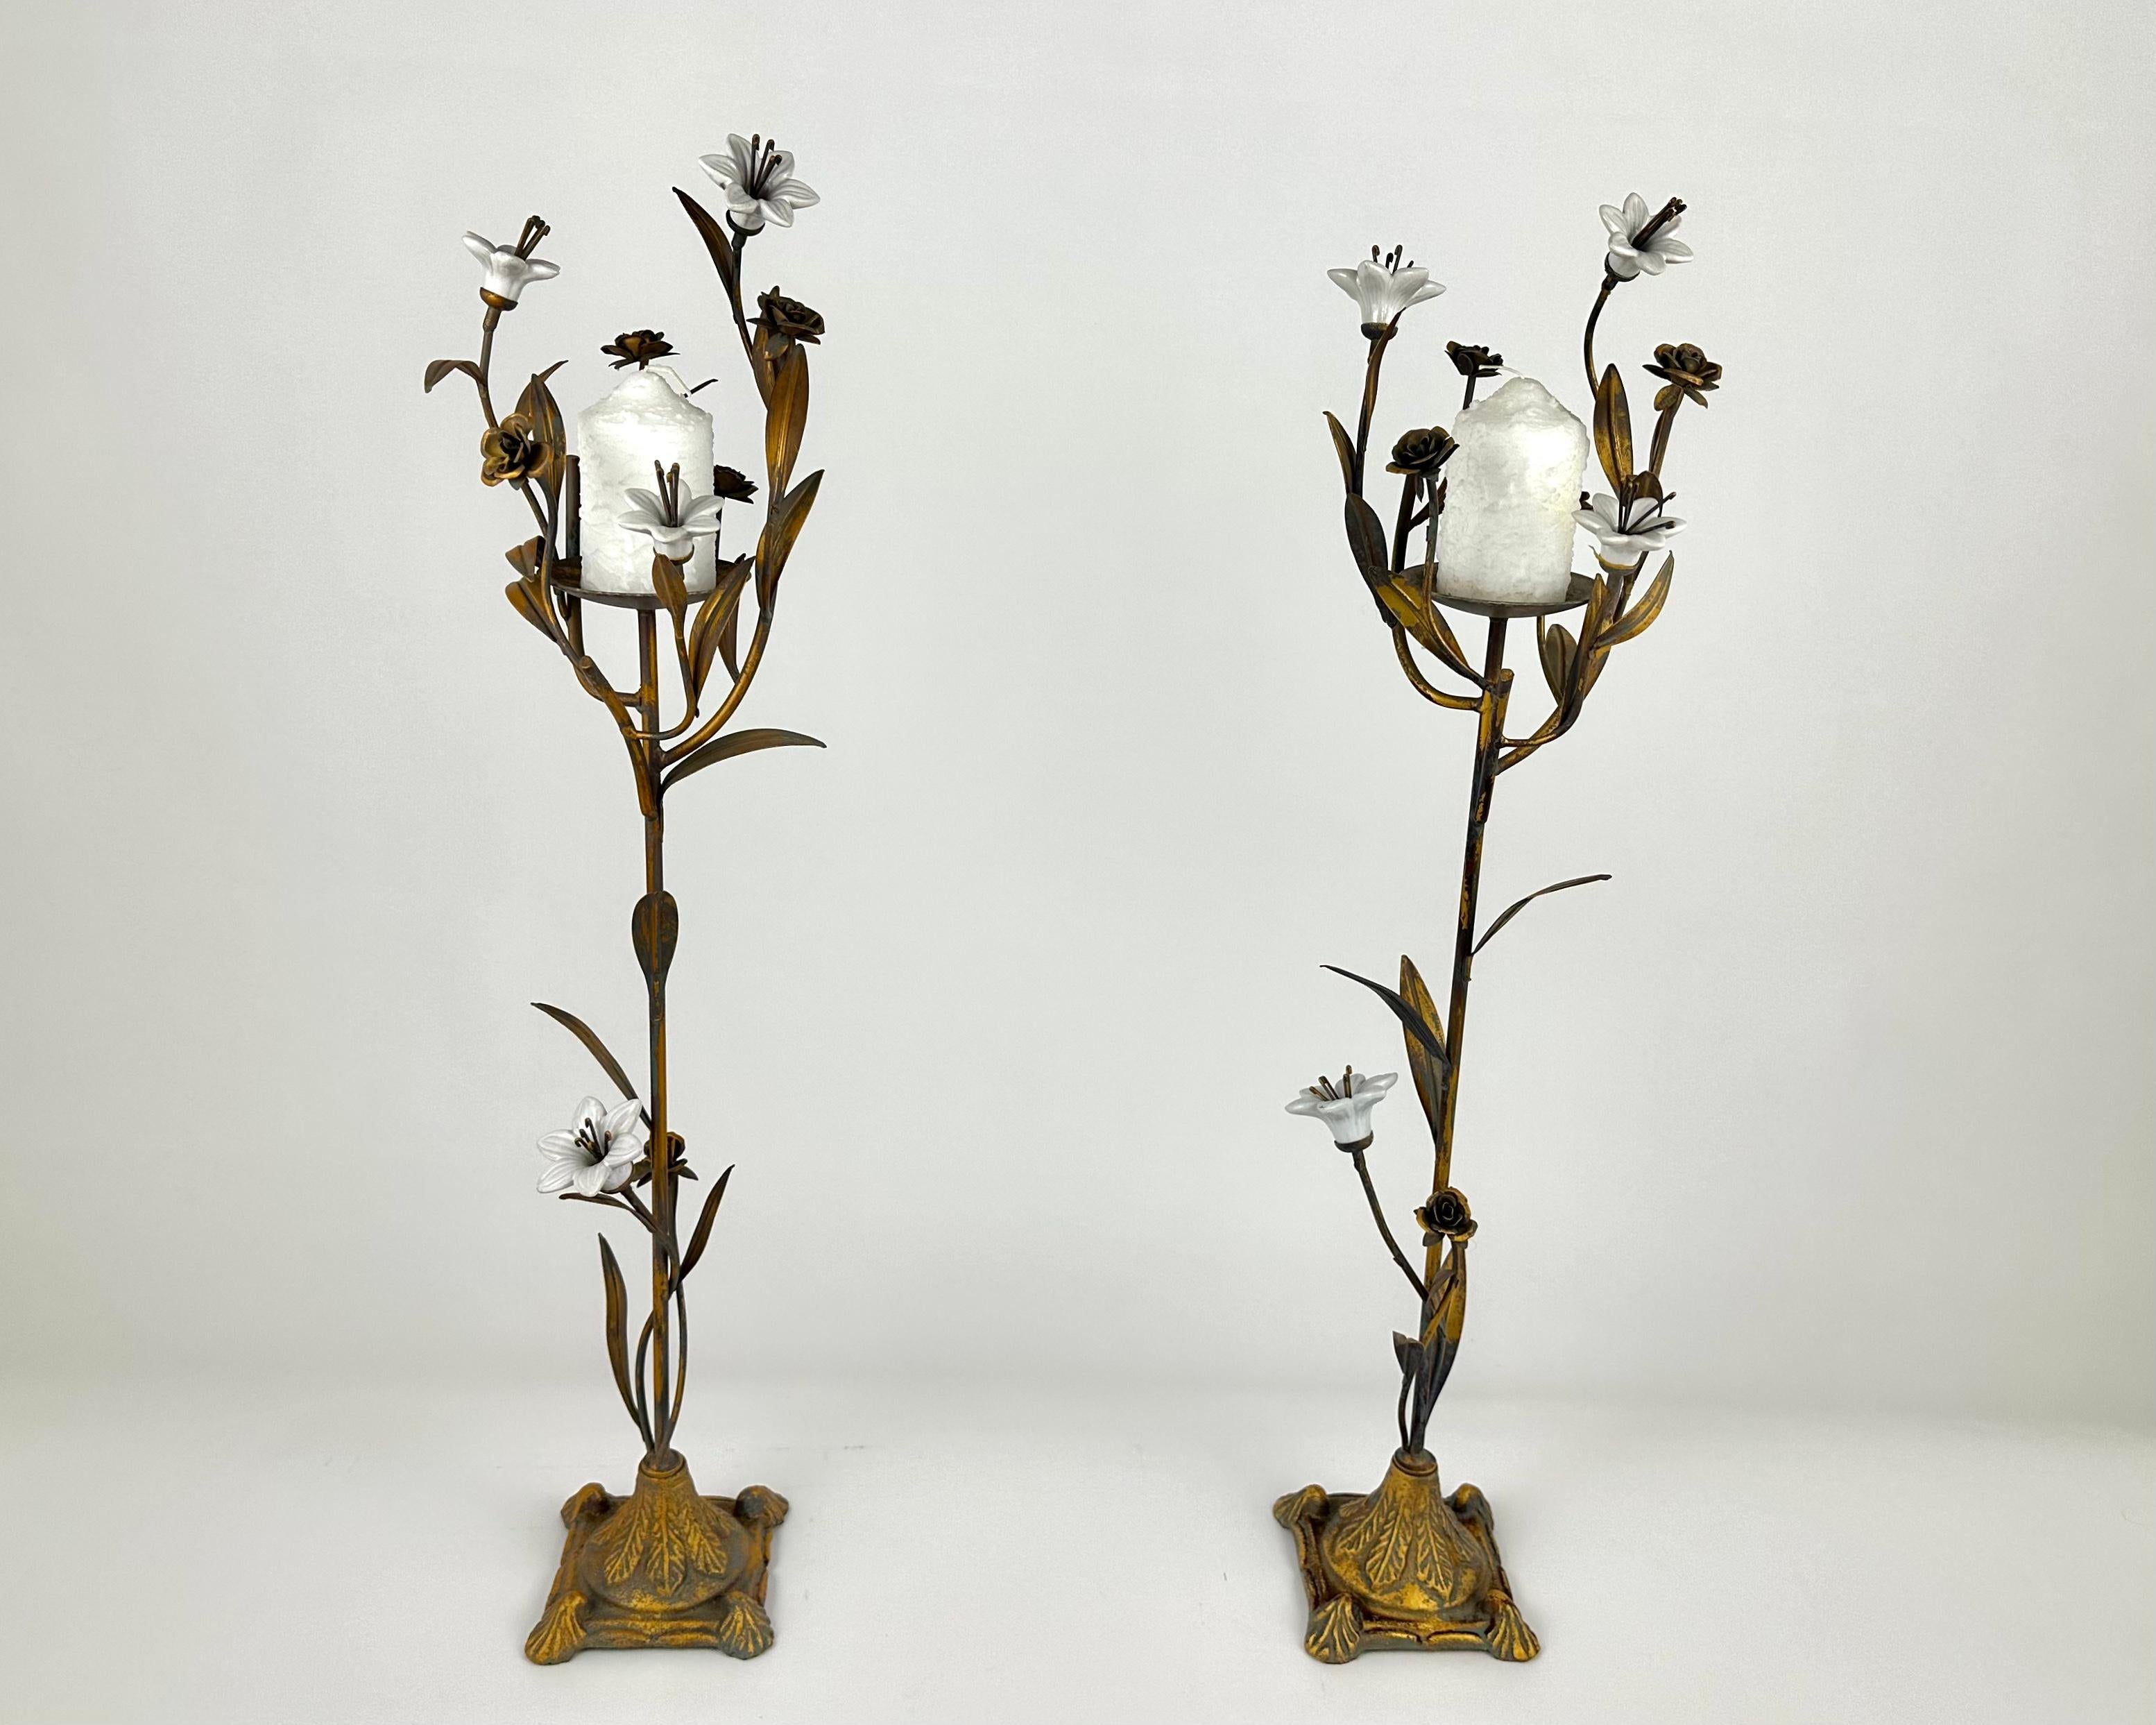 These lovely pair of candelabras, c. 1970, are from Italy and feature milk-porcelain lilies, gilt-bronze leaves and rosebuds.

These vintage floral candlestick holders are absolutely stunning.

The details on this piece are incredible - from the